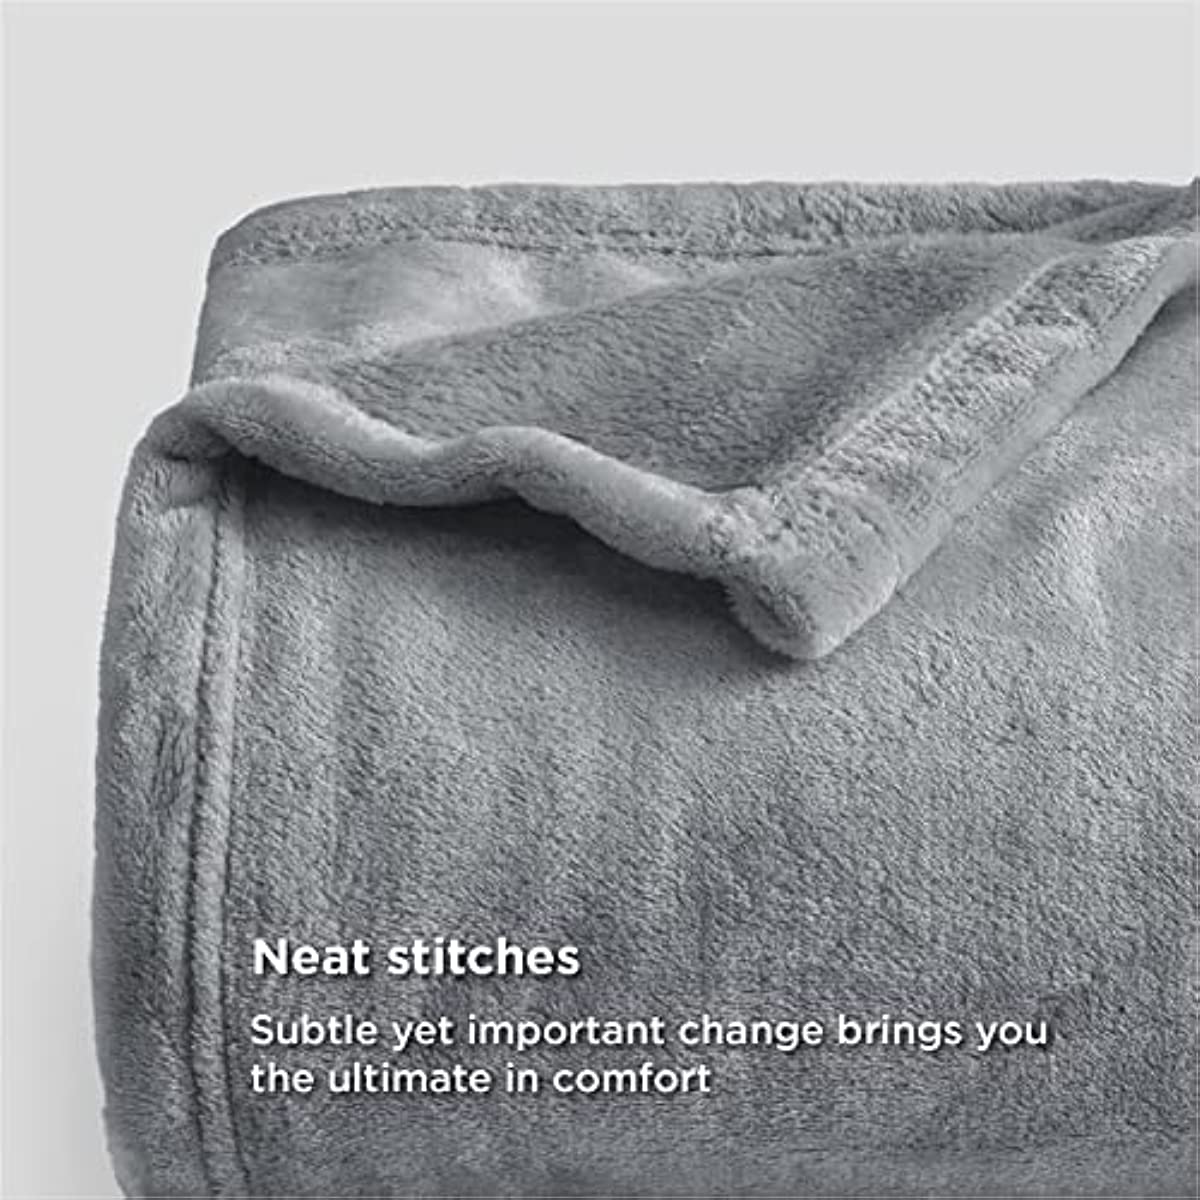 Fleece Blankets Twin Size Grey - 300GSM Lightweight Plush Fuzzy Cozy Soft Twin Blanket for Bed. Sofa. Couch. Travel. Camping. 60x80 inches